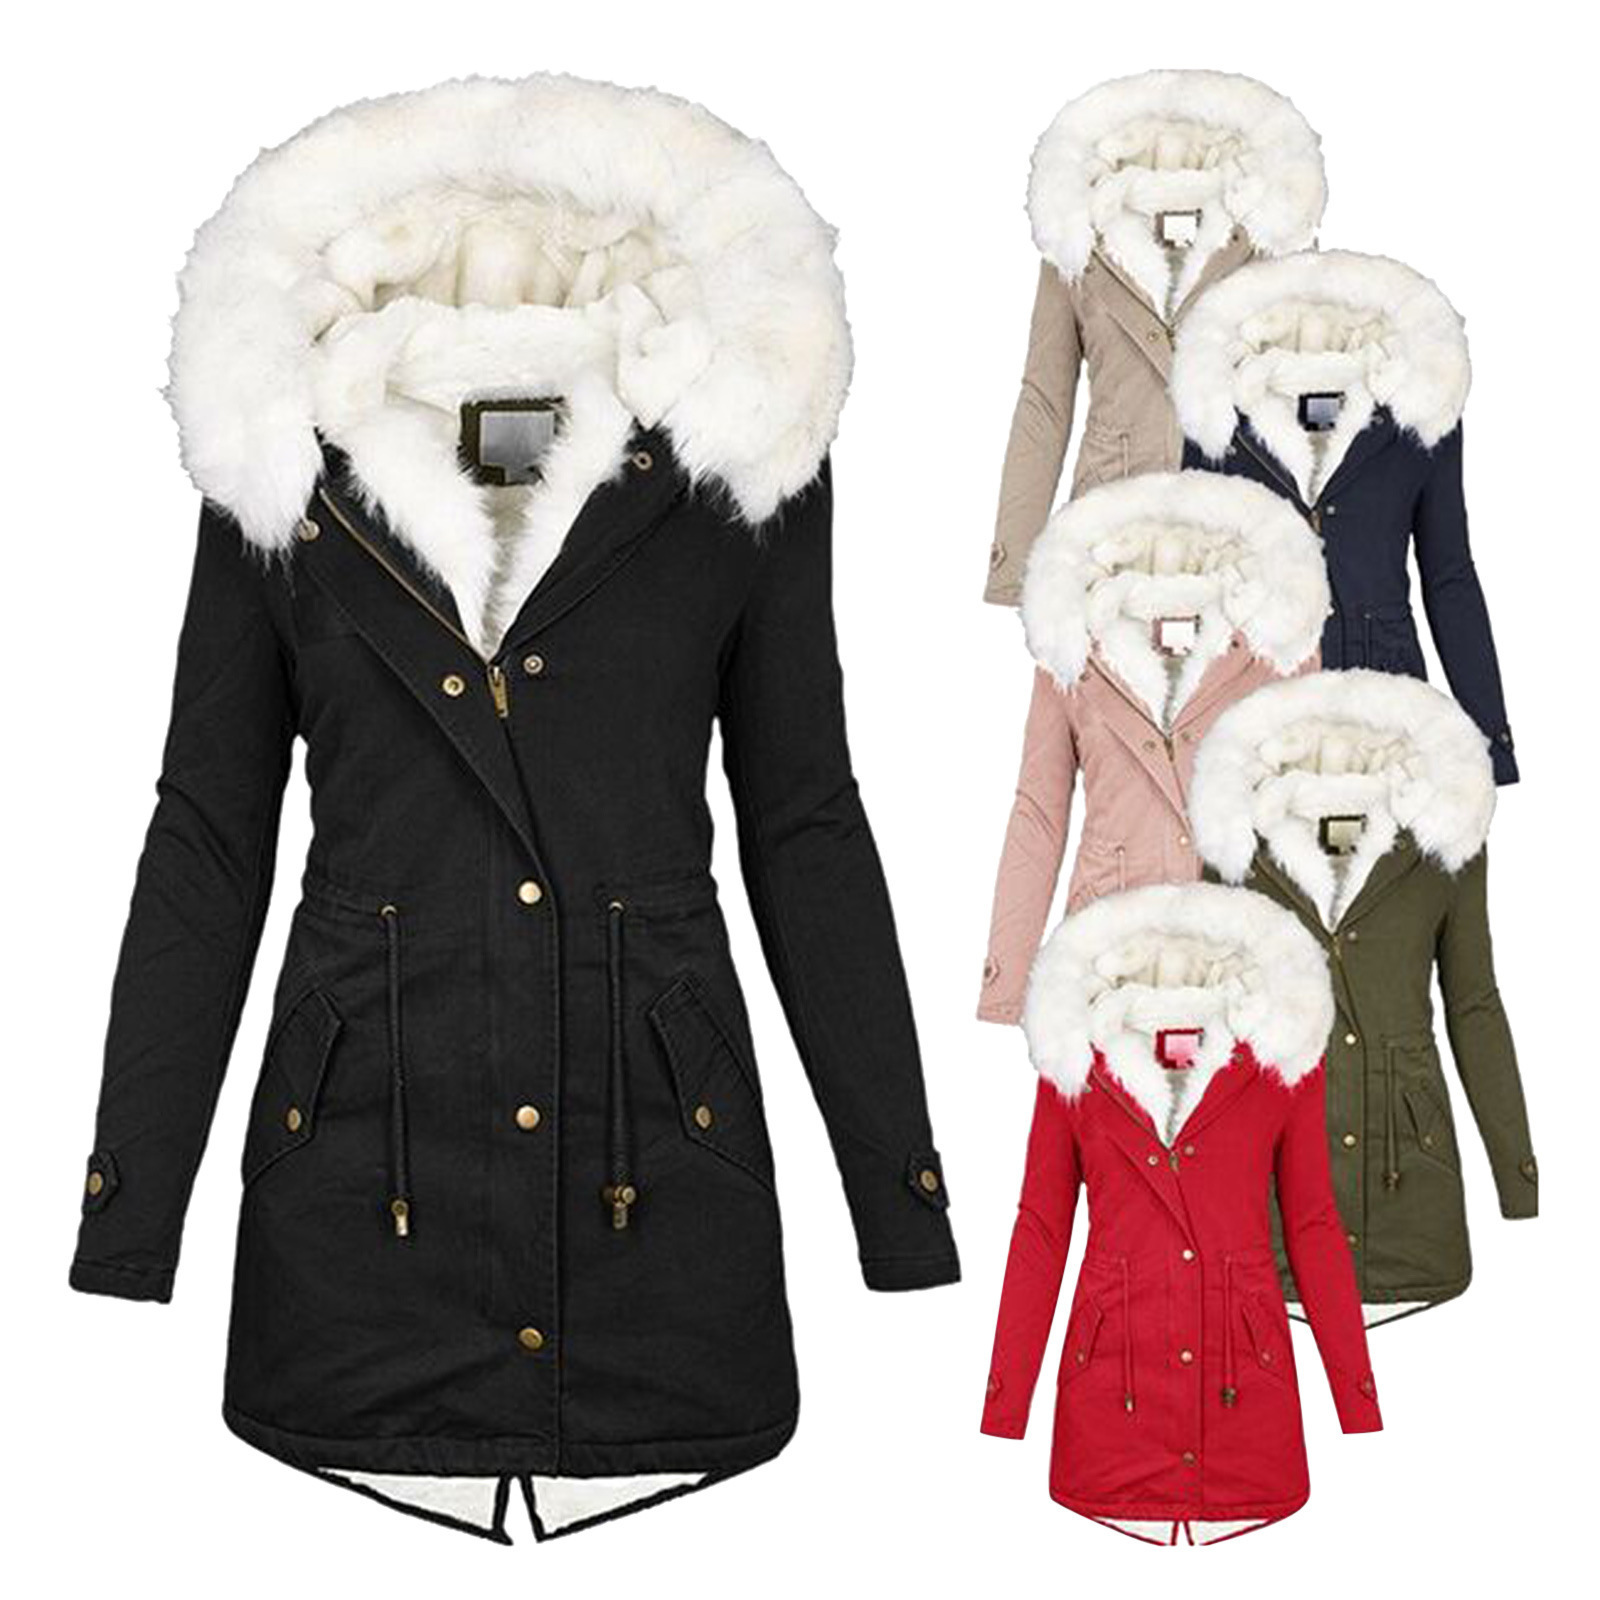 Autumn and Winter Large Size Cotton Coats, Hooded Fur Collars, Thick Waist Thick Mid-length Women's Cotton Clothing